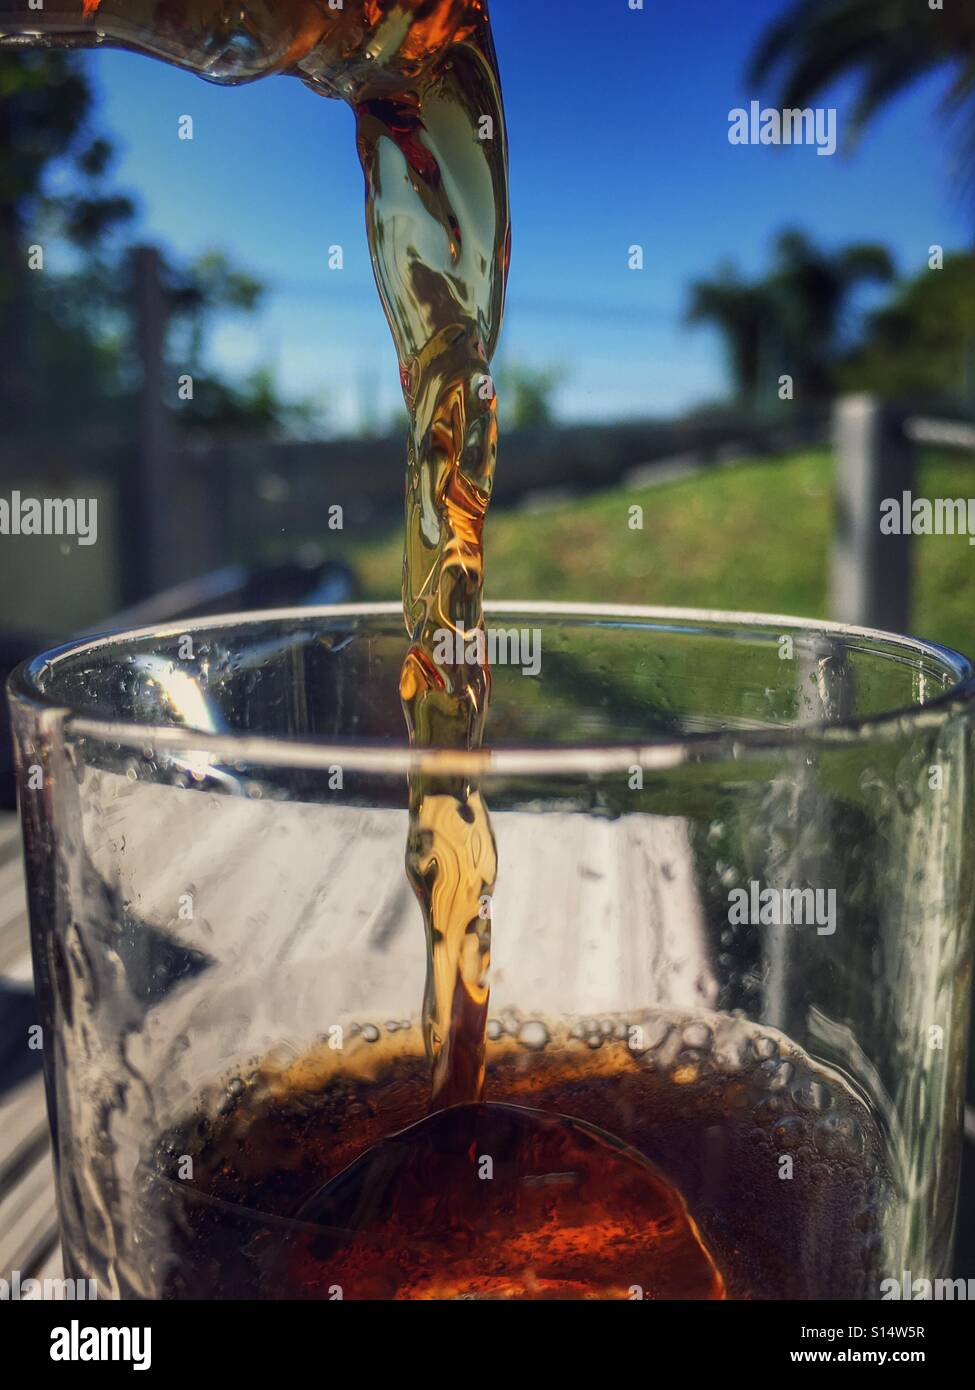 Soft drink being poured into a glass with ice with tropical cal for plants in the background Stock Photo